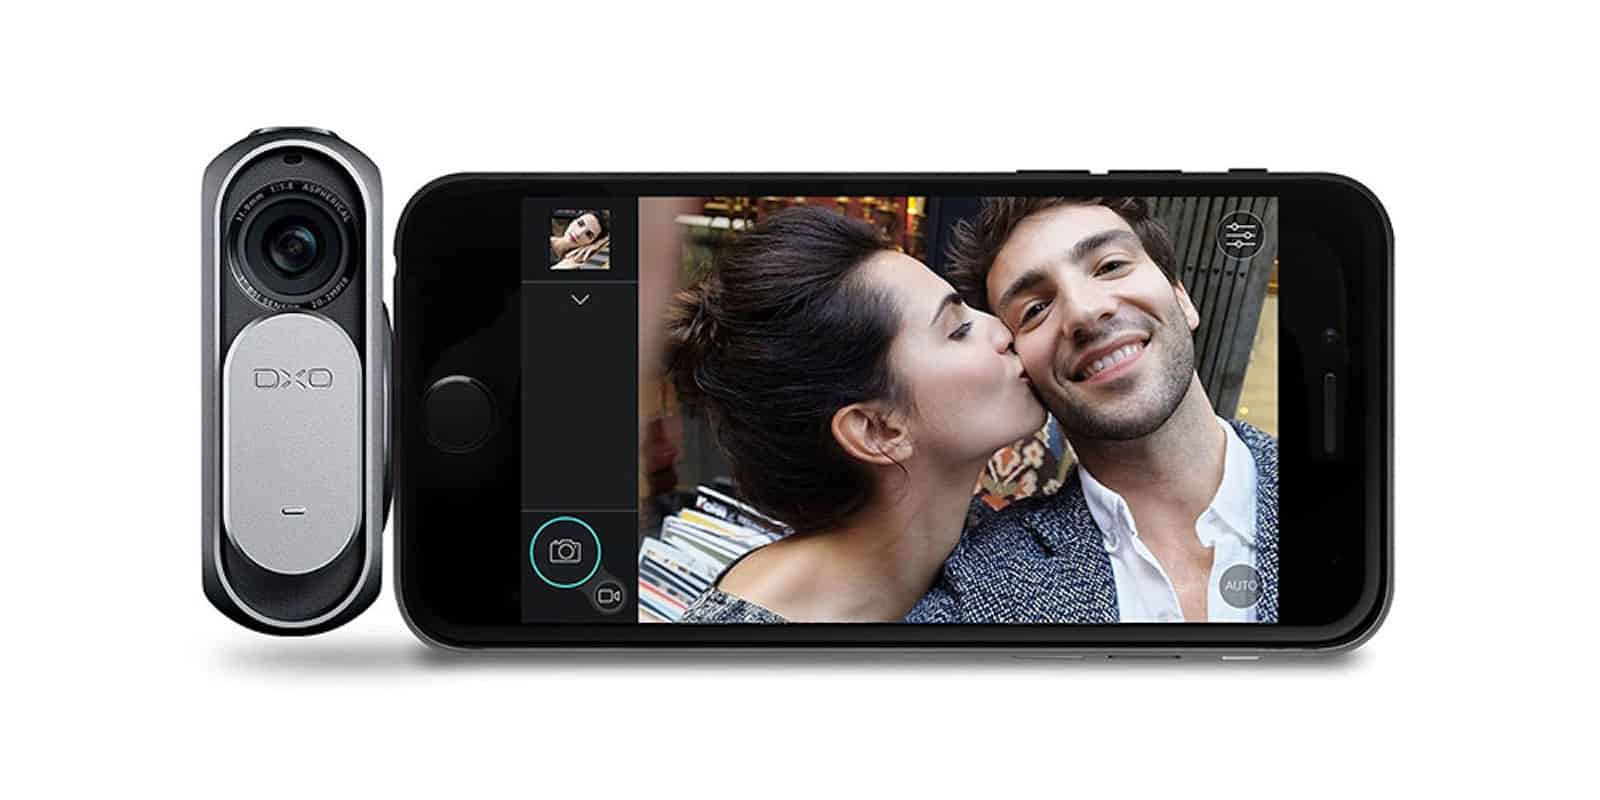 DxO One is an entire camera module that elevates any iDevice's photo abilities to professional grade.